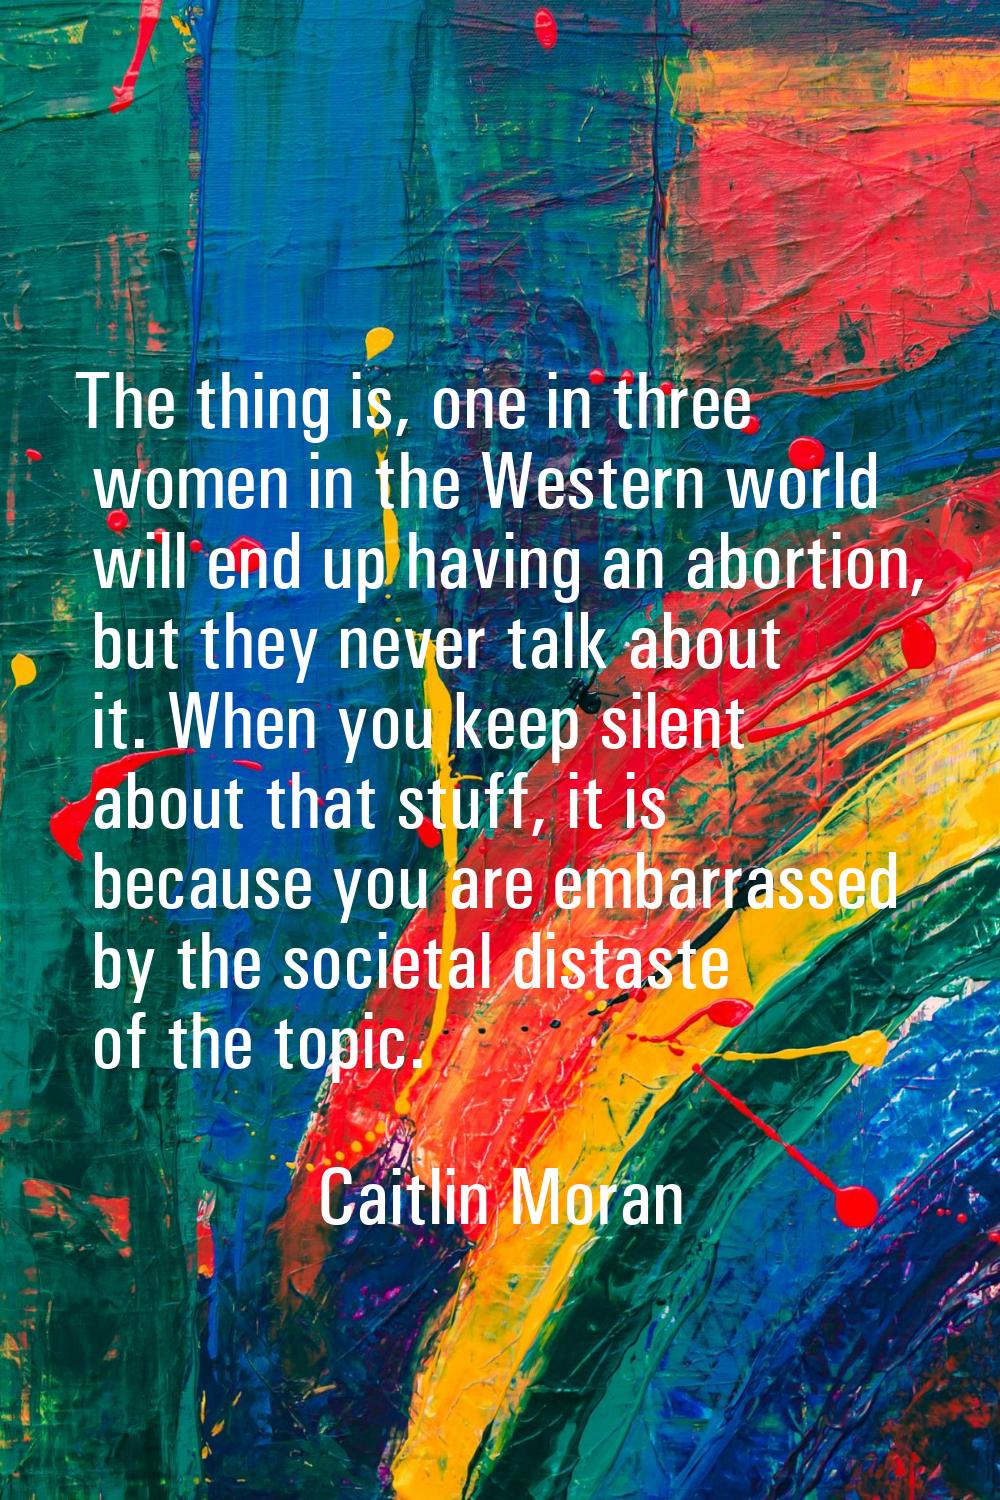 The thing is, one in three women in the Western world will end up having an abortion, but they neve